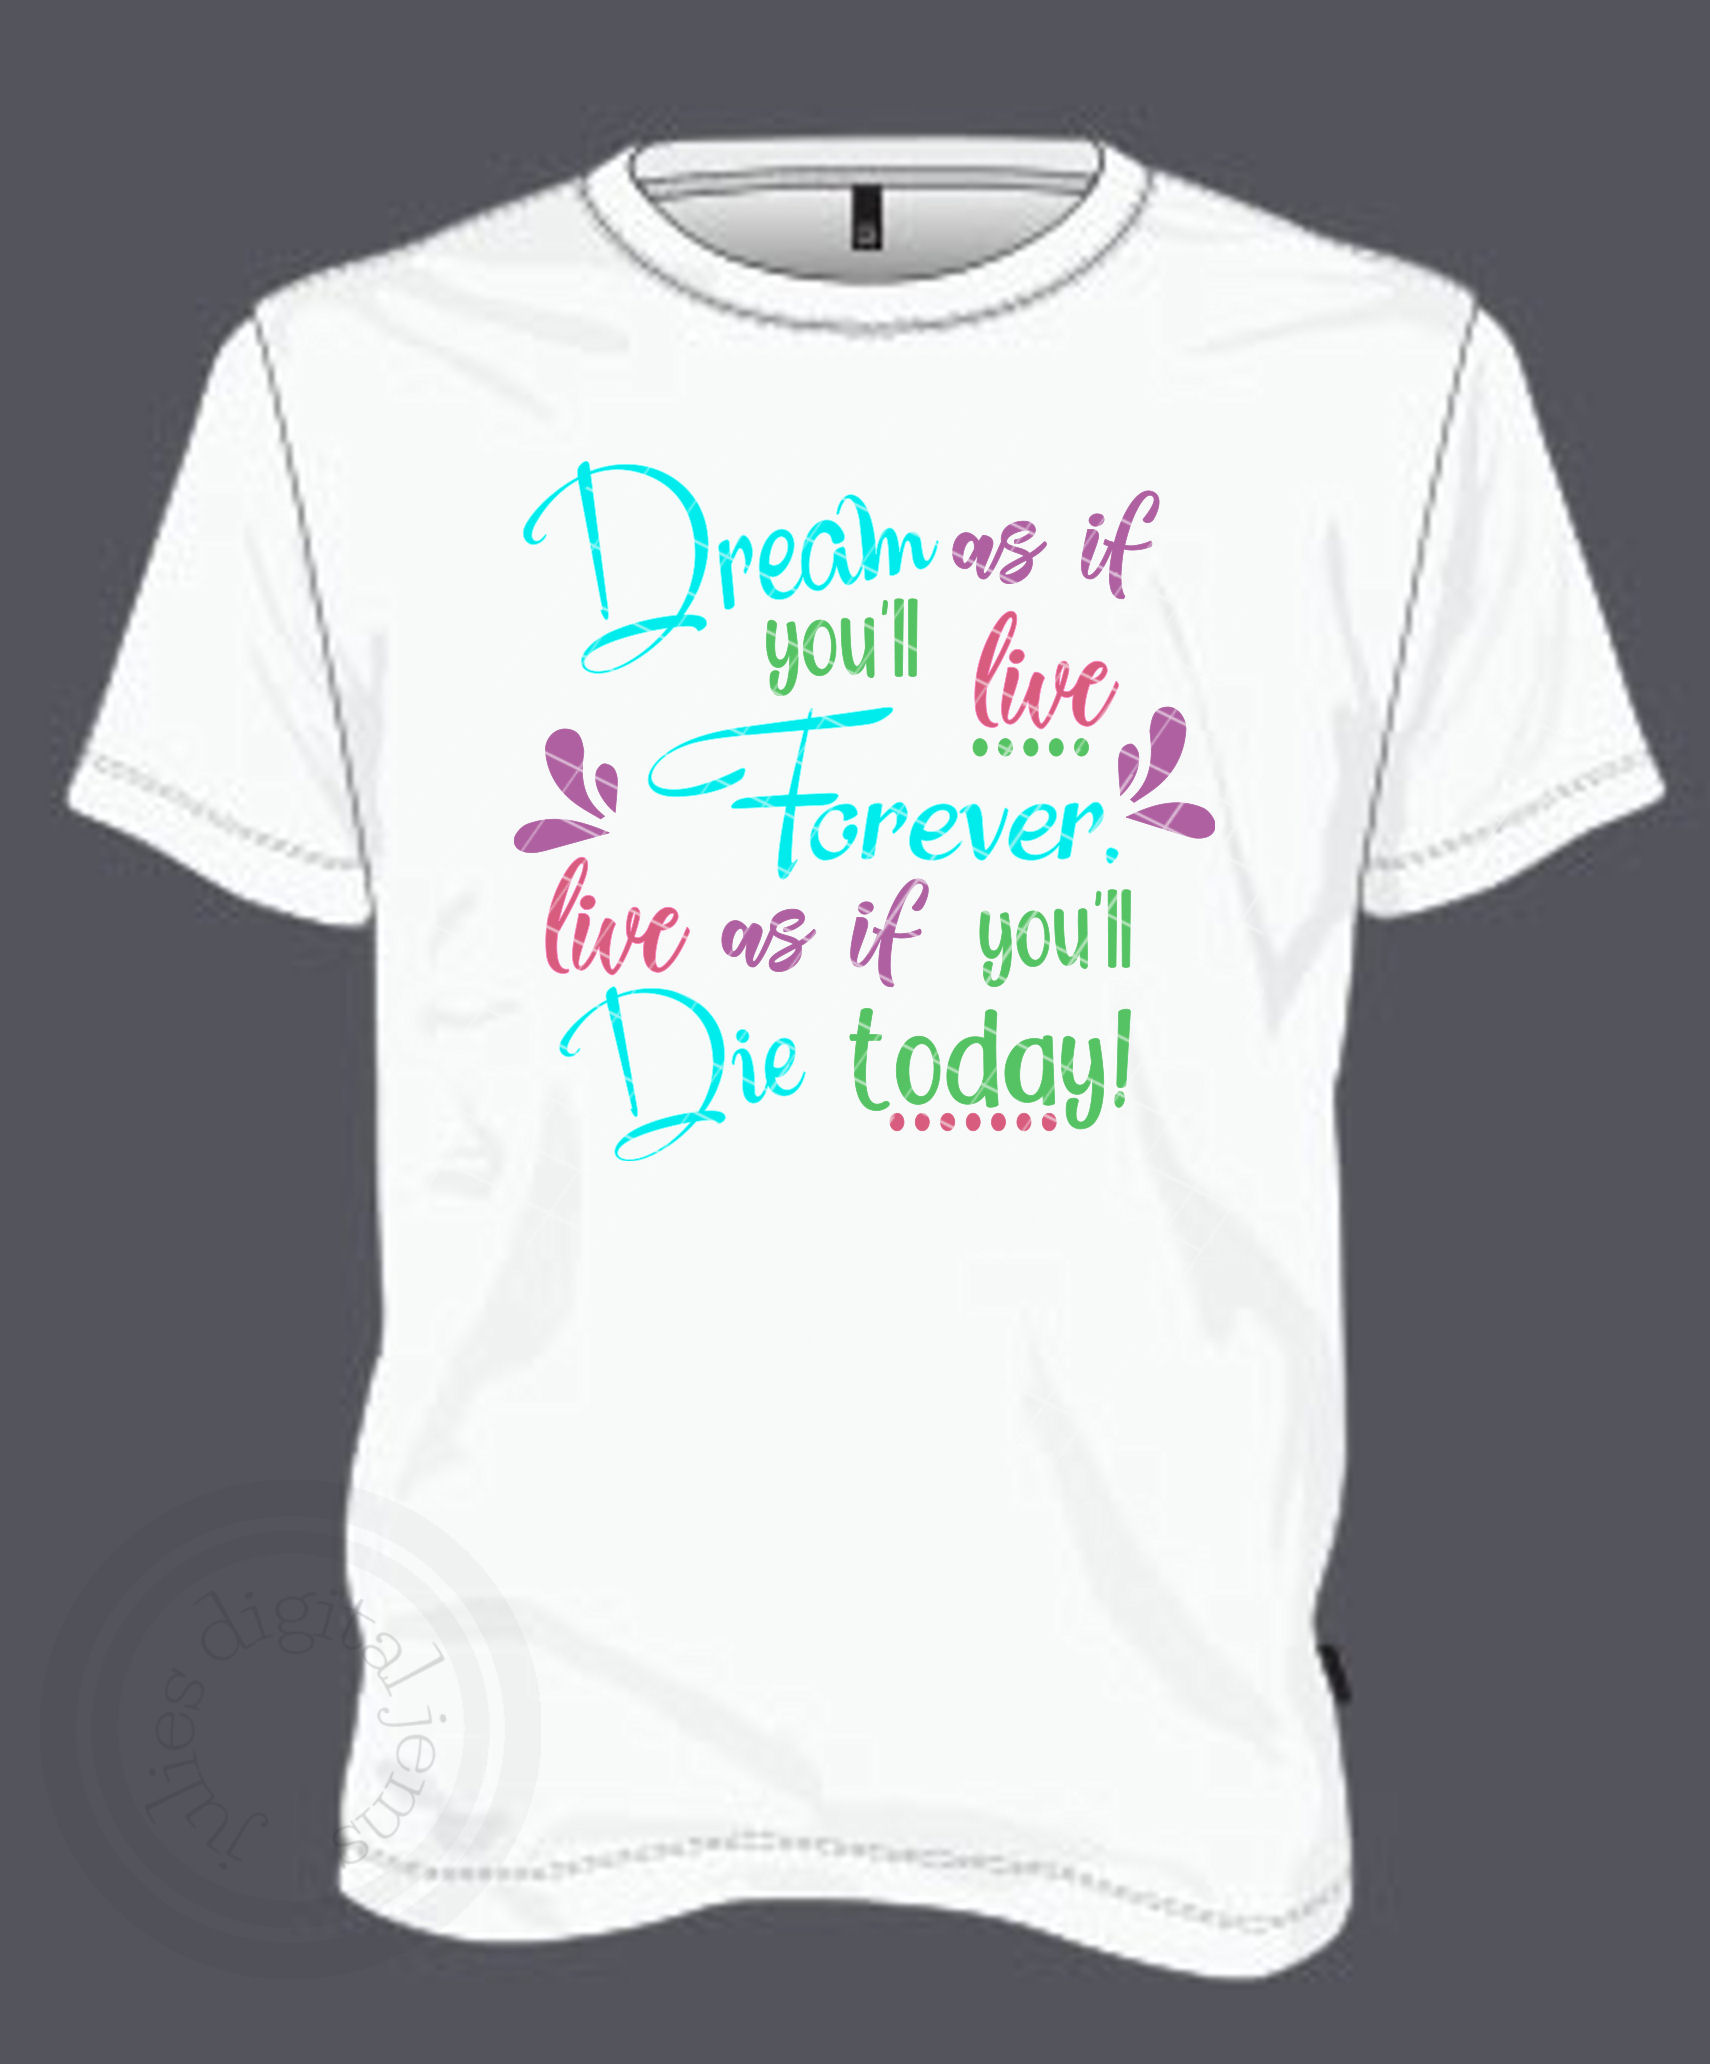 Download Live forever svg, Dream as if you'll live forever, Dream ...